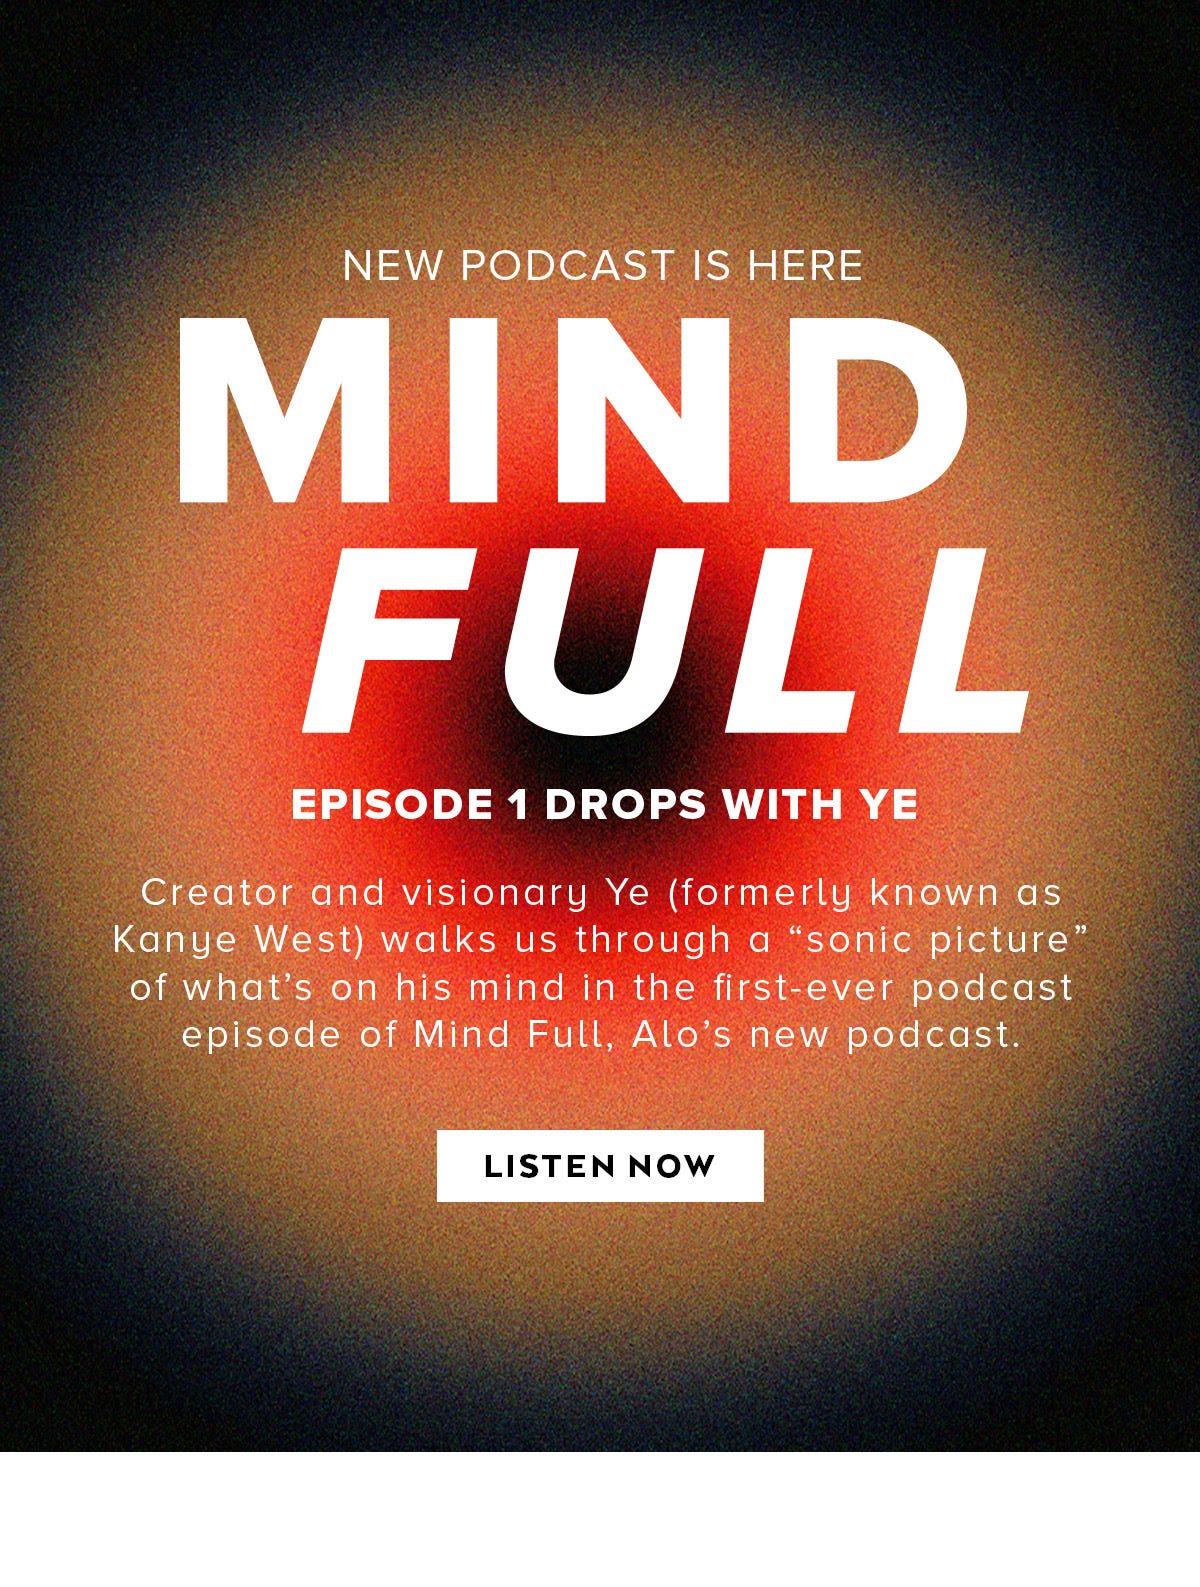 ALO YOGA NEW PODCAST IS HERE MIND FULL EPISODE 1 DROPS WITH YE  Creator and visionary Ye (formerly known as Kane West) walks us through a “sonic picture” of what’s on his mind in the first-ever podcast episode of Mind Full, Alo’s new podcast.  LISTEN NOW